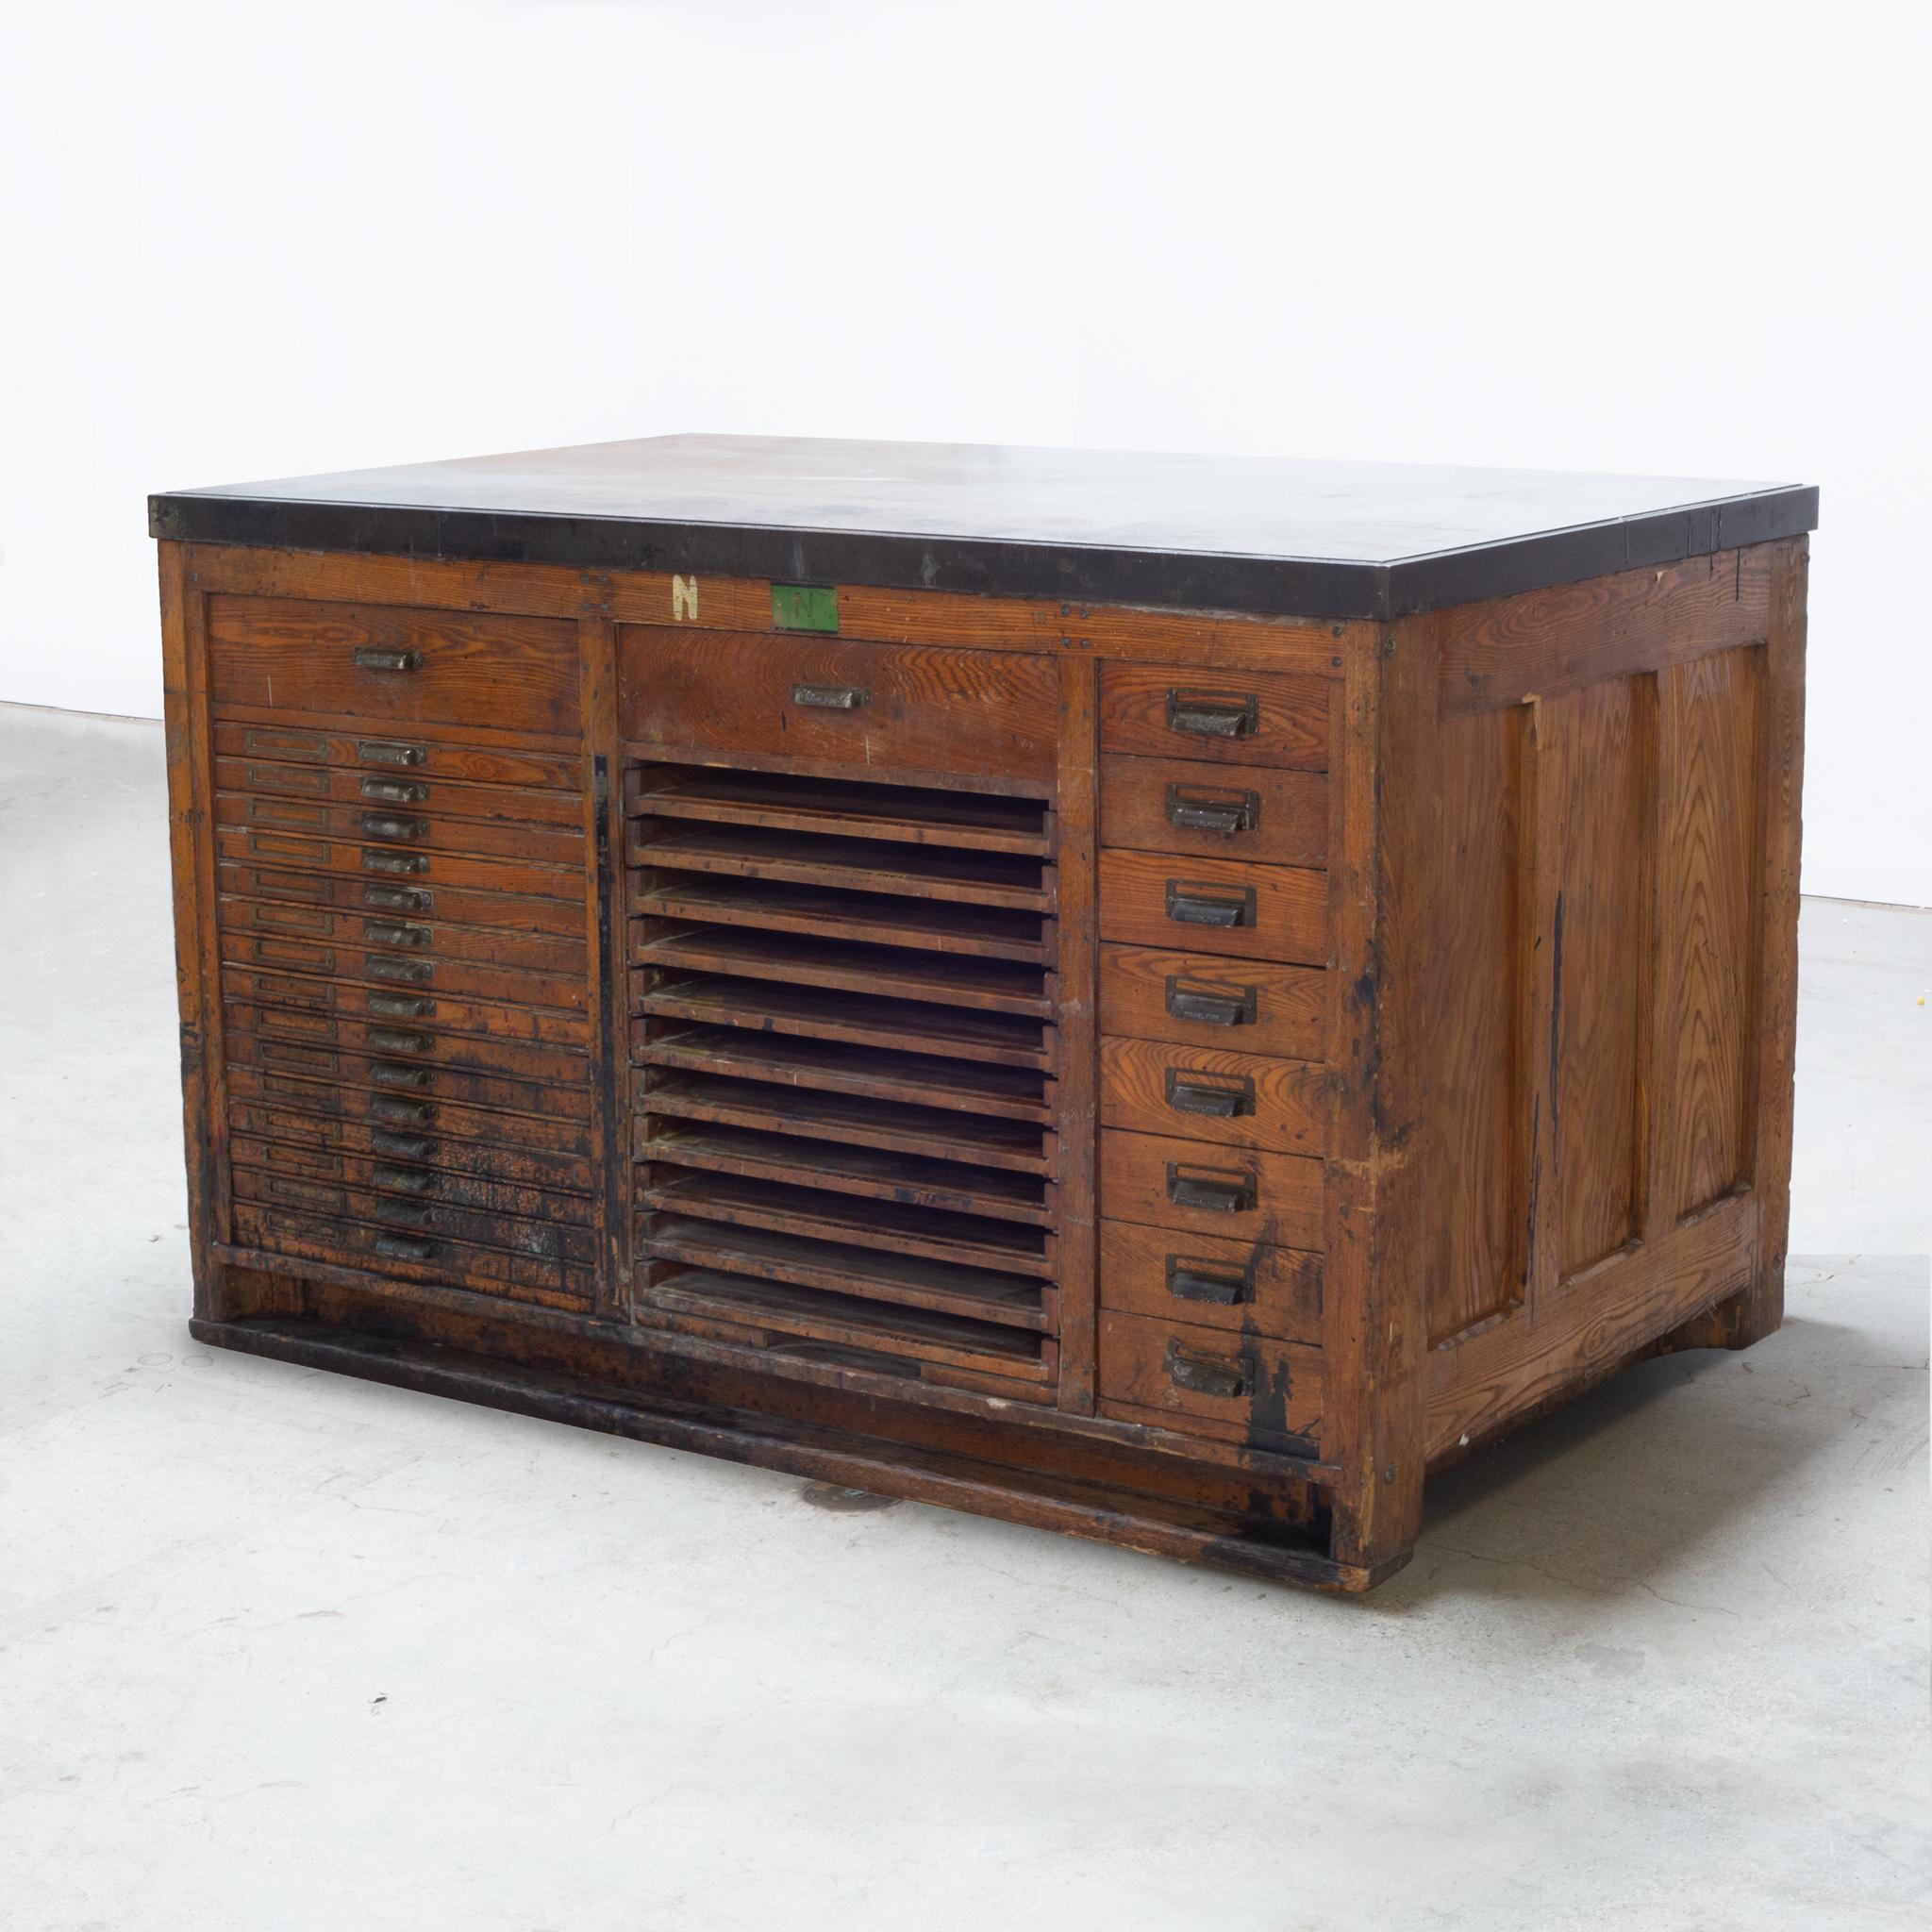 About

An early 20th century printmaker's typeset workbench. The work surface is solid iron and sits on top of the base. The nicely worn wooden base has 2 large drawers, 8 small drawers, 15 flat drawers with brass cardholders, and 11 pull out